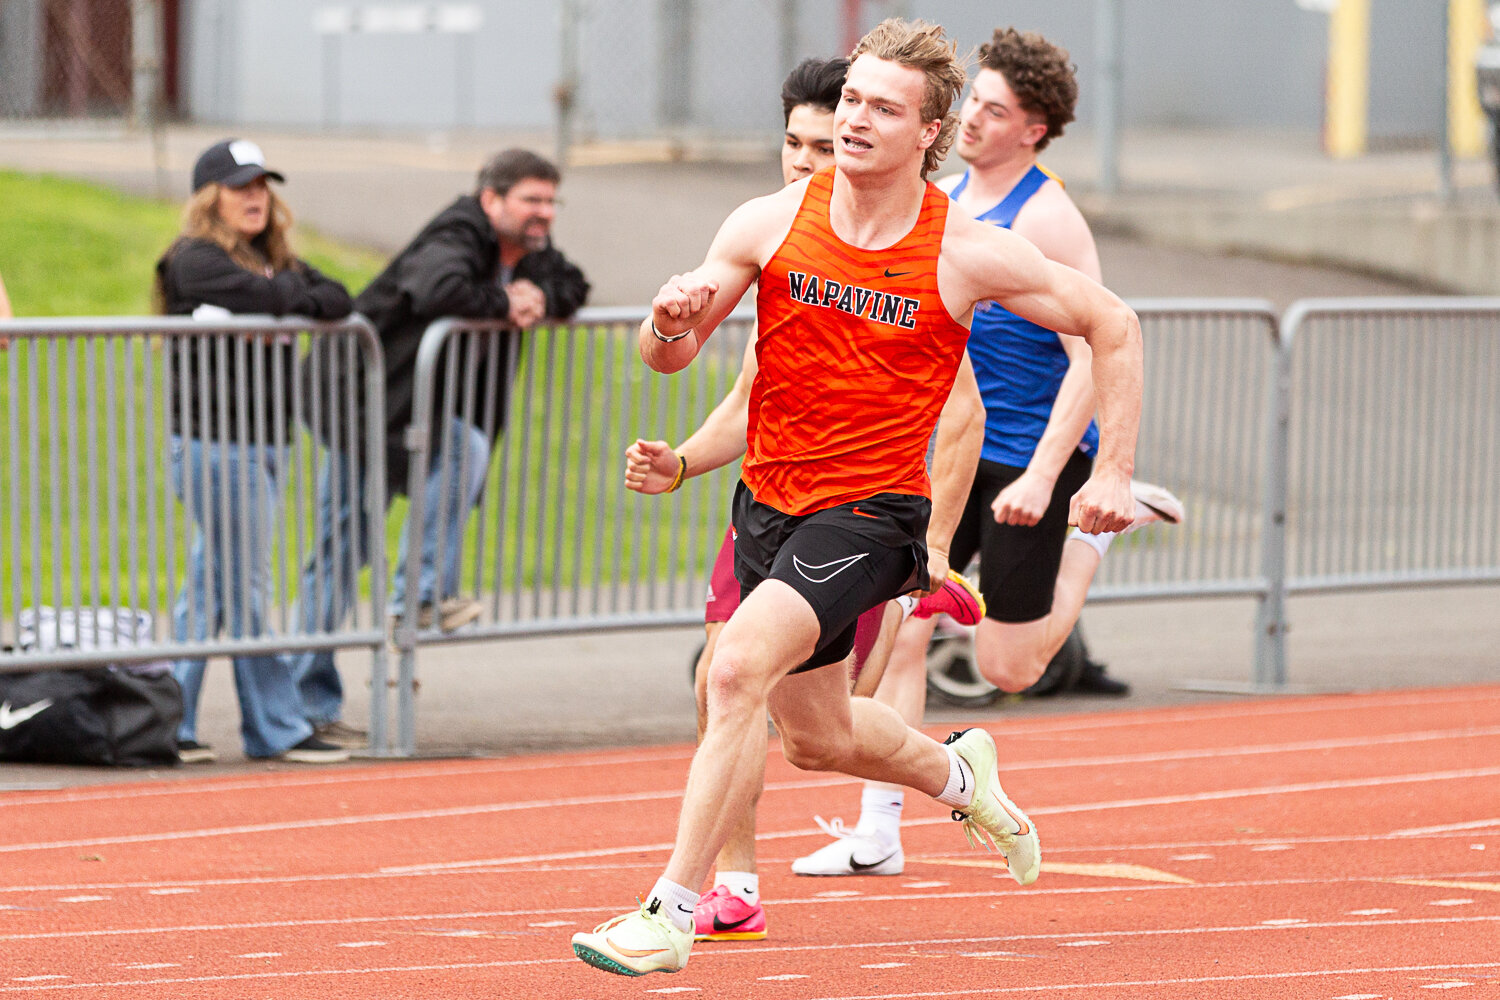 Napavine's Max O'Neill seperates from the pack after the curve in the 200-meter dash at the Chehalis Activators Classic April 22 at W.F. West.